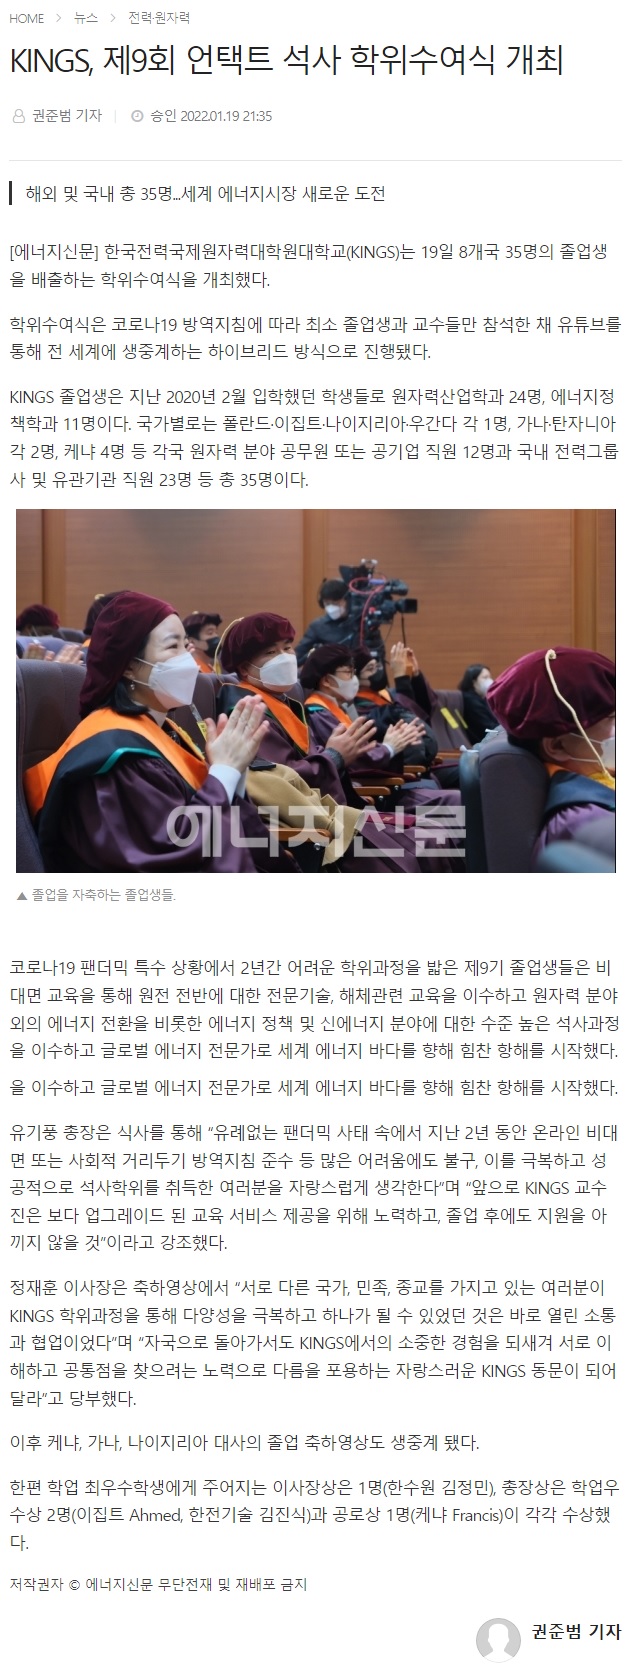 KINGS held the 9th Untact Master's Degree Conferment Ceremony